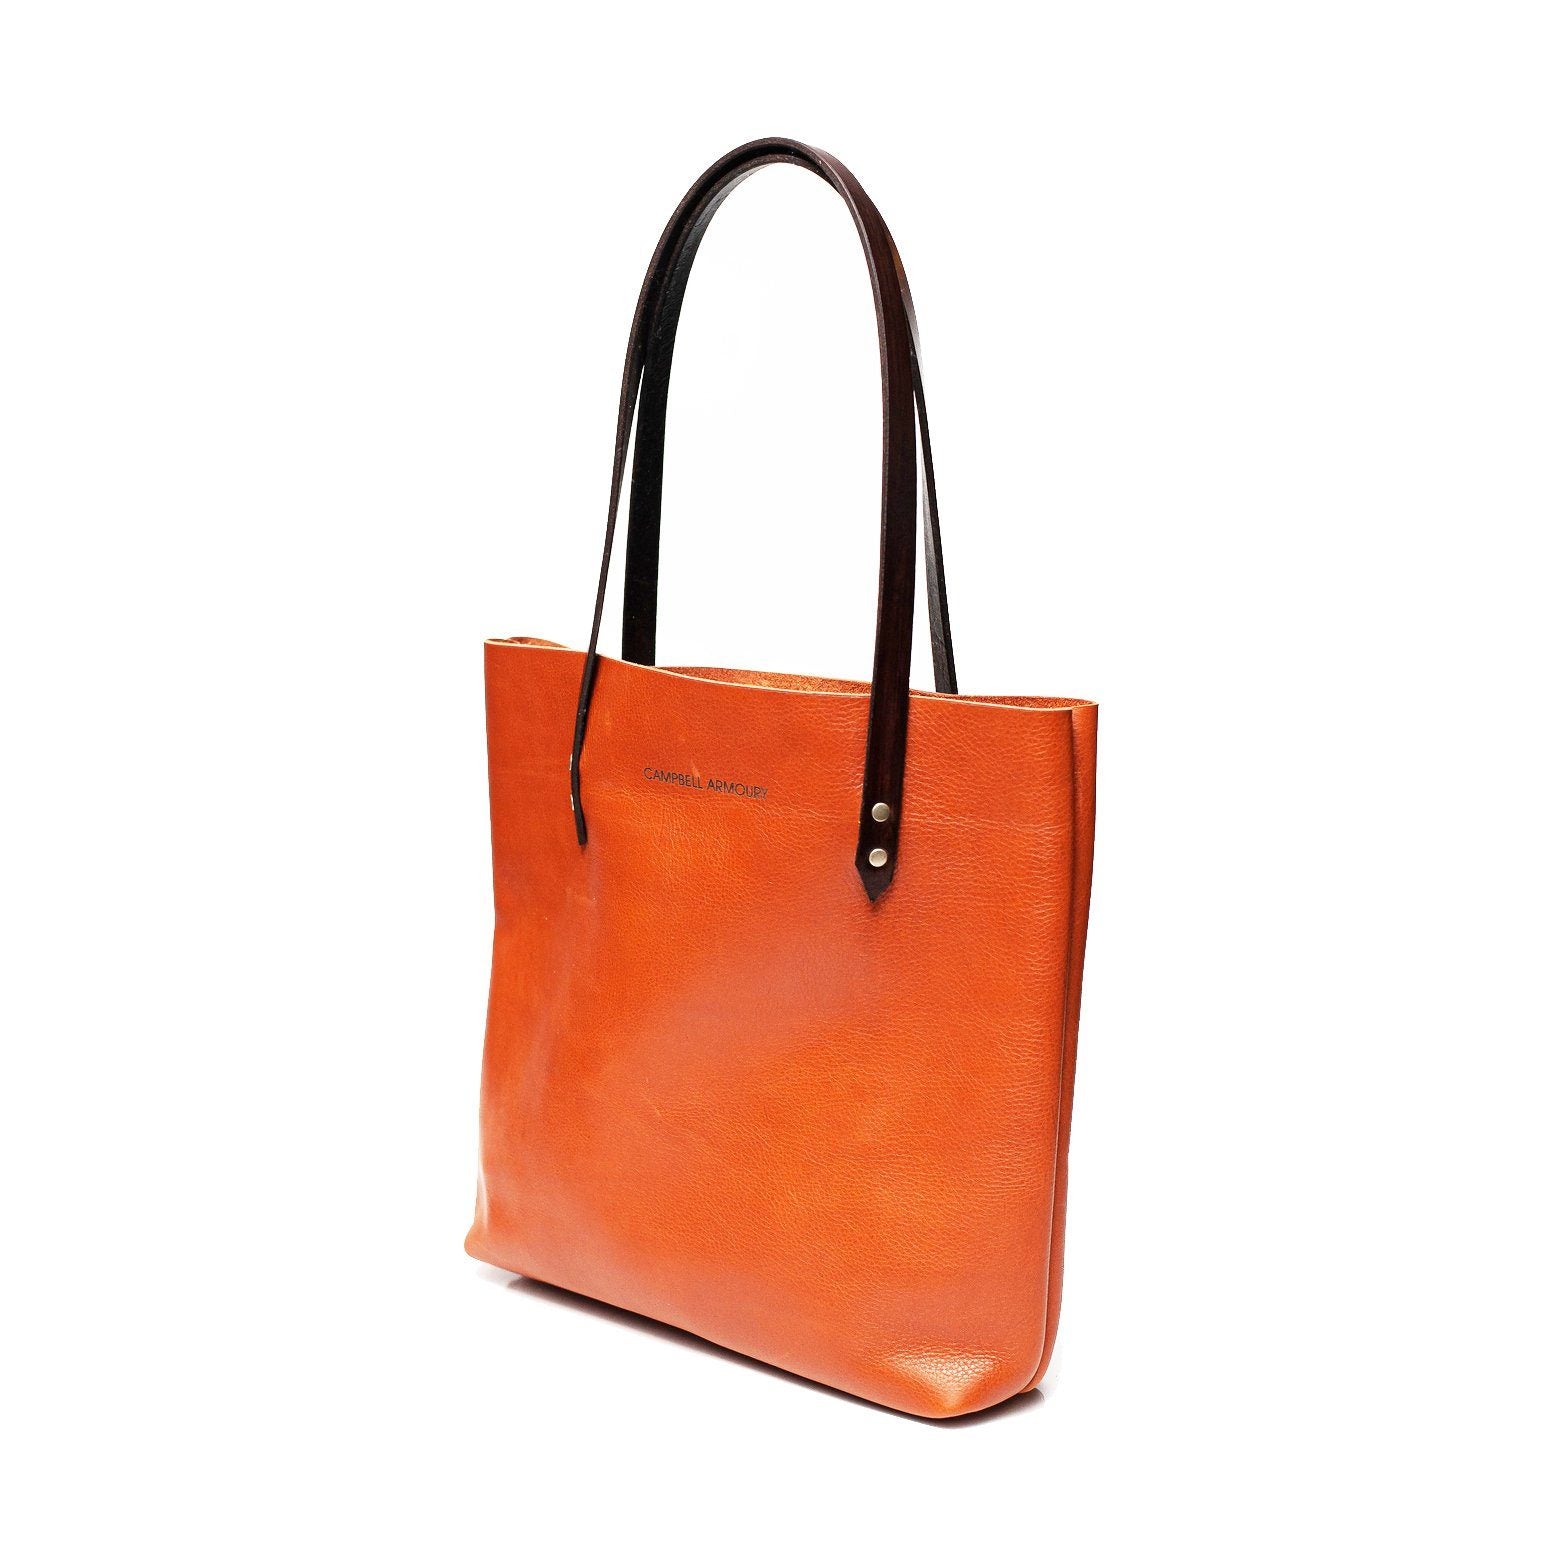 Campbell Armoury Leather Soft Tote Bag clothing & accessories Campbell Armoury rust